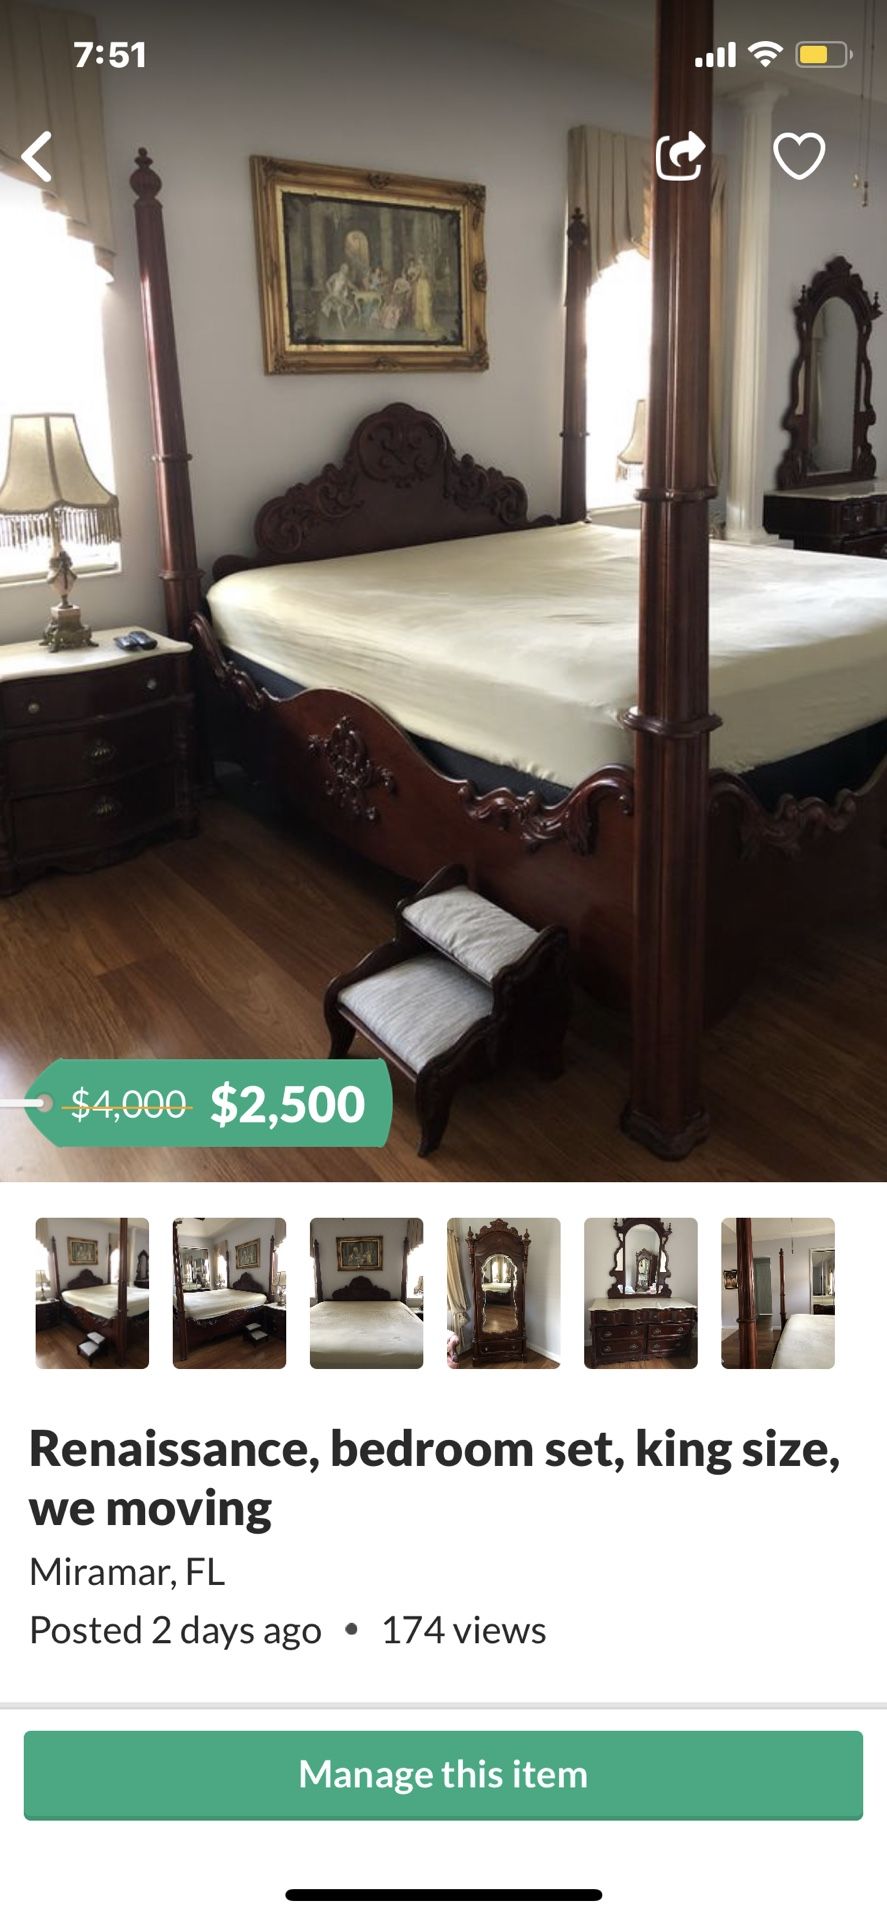 Renaissance, bedroom set, king sizeh. REDUCEPRICE EVERTING INCLUDES SPECIAL SPECIAL. LOW PRICE!!!!